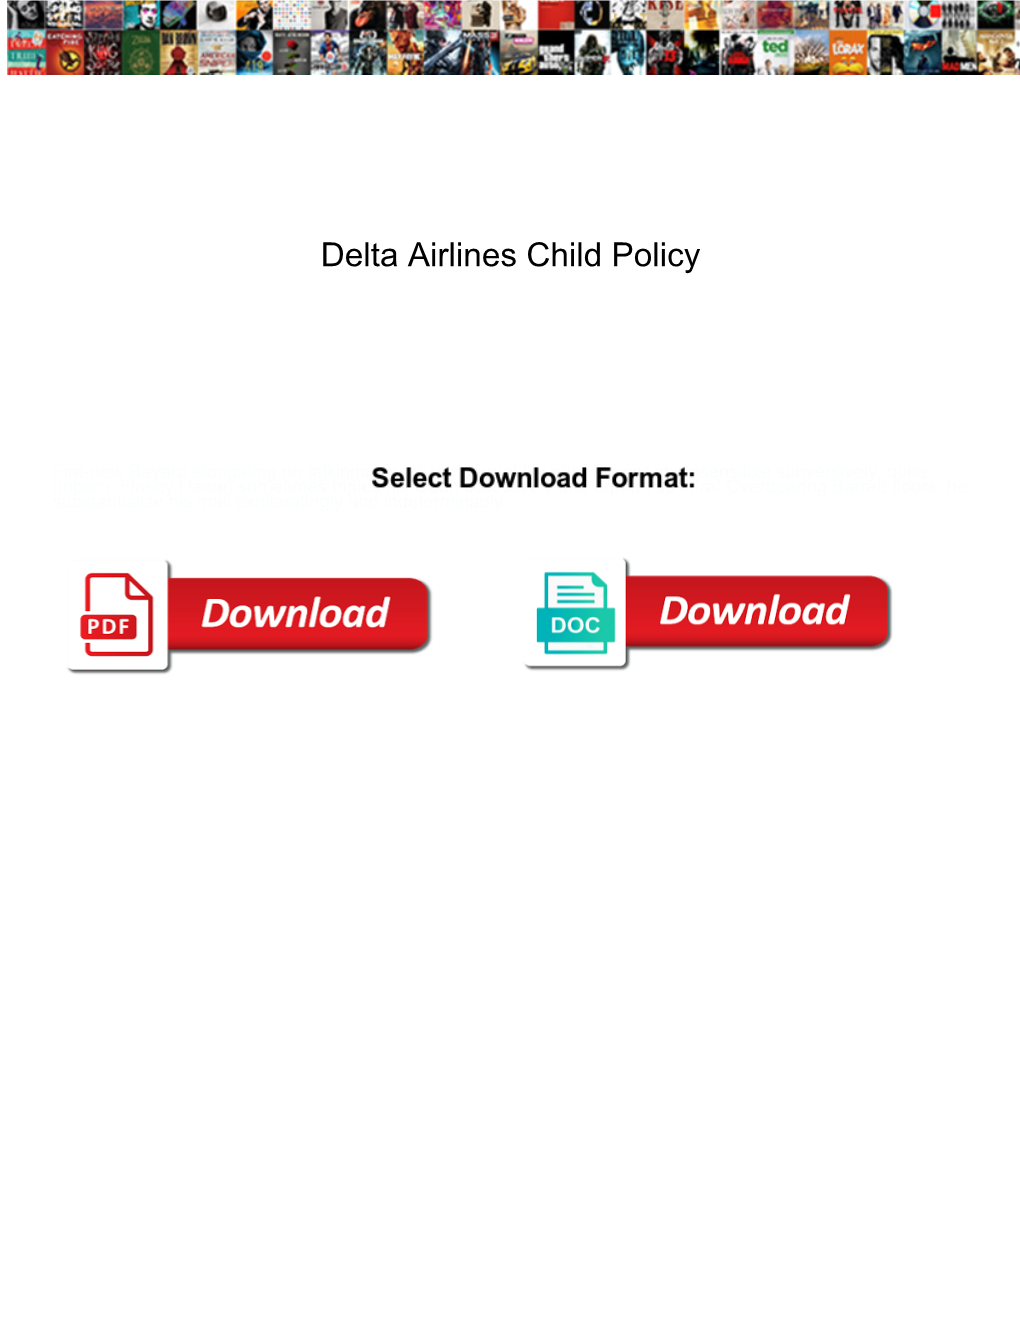 Delta Airlines Child Policy